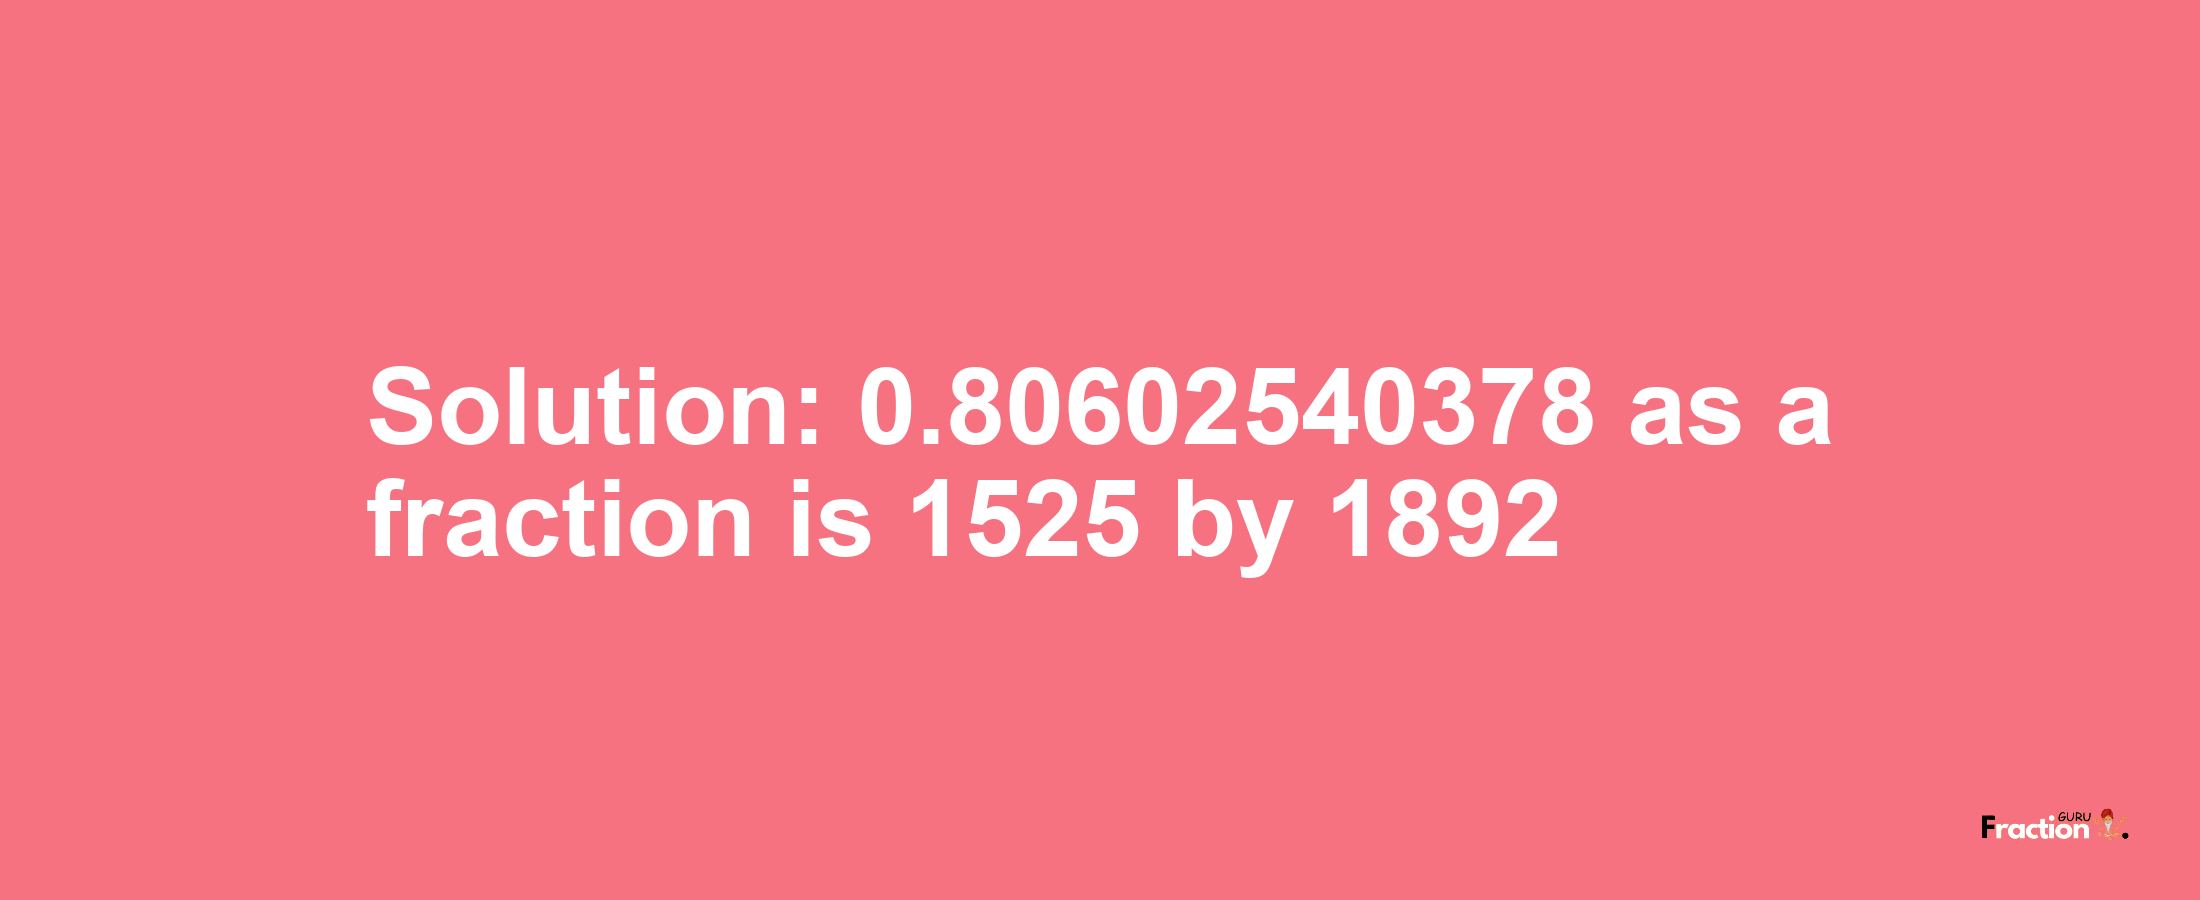 Solution:0.80602540378 as a fraction is 1525/1892